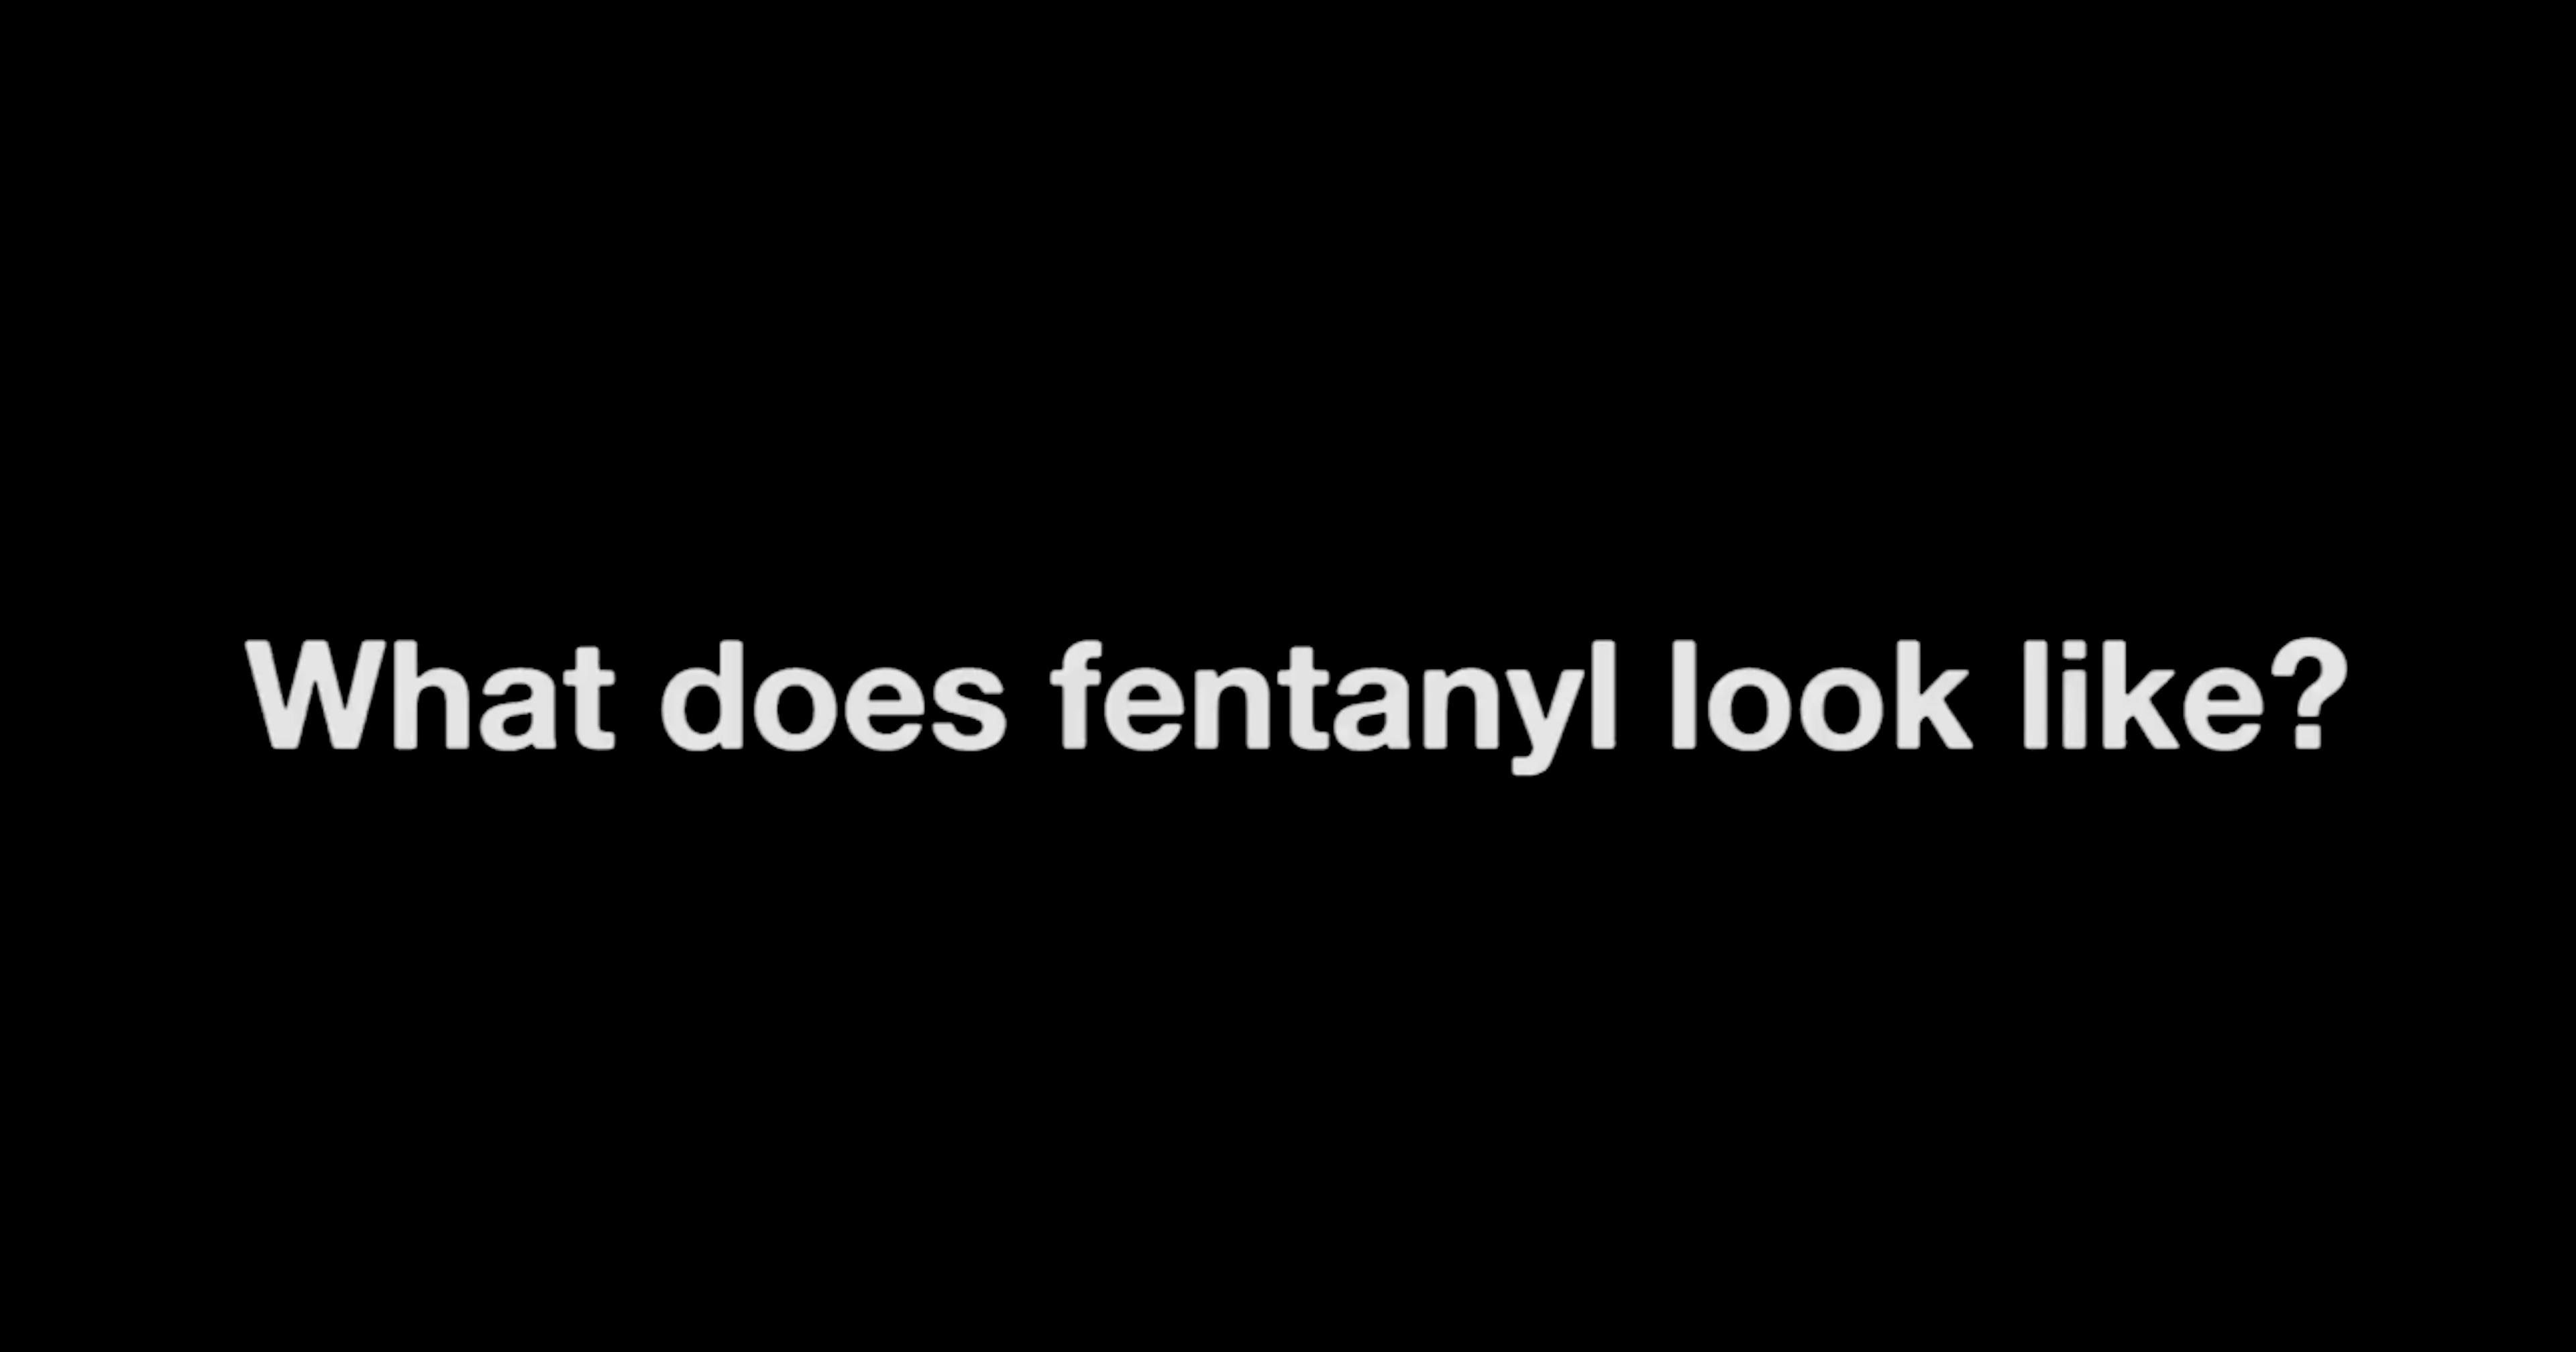 What does fentanyl look like?